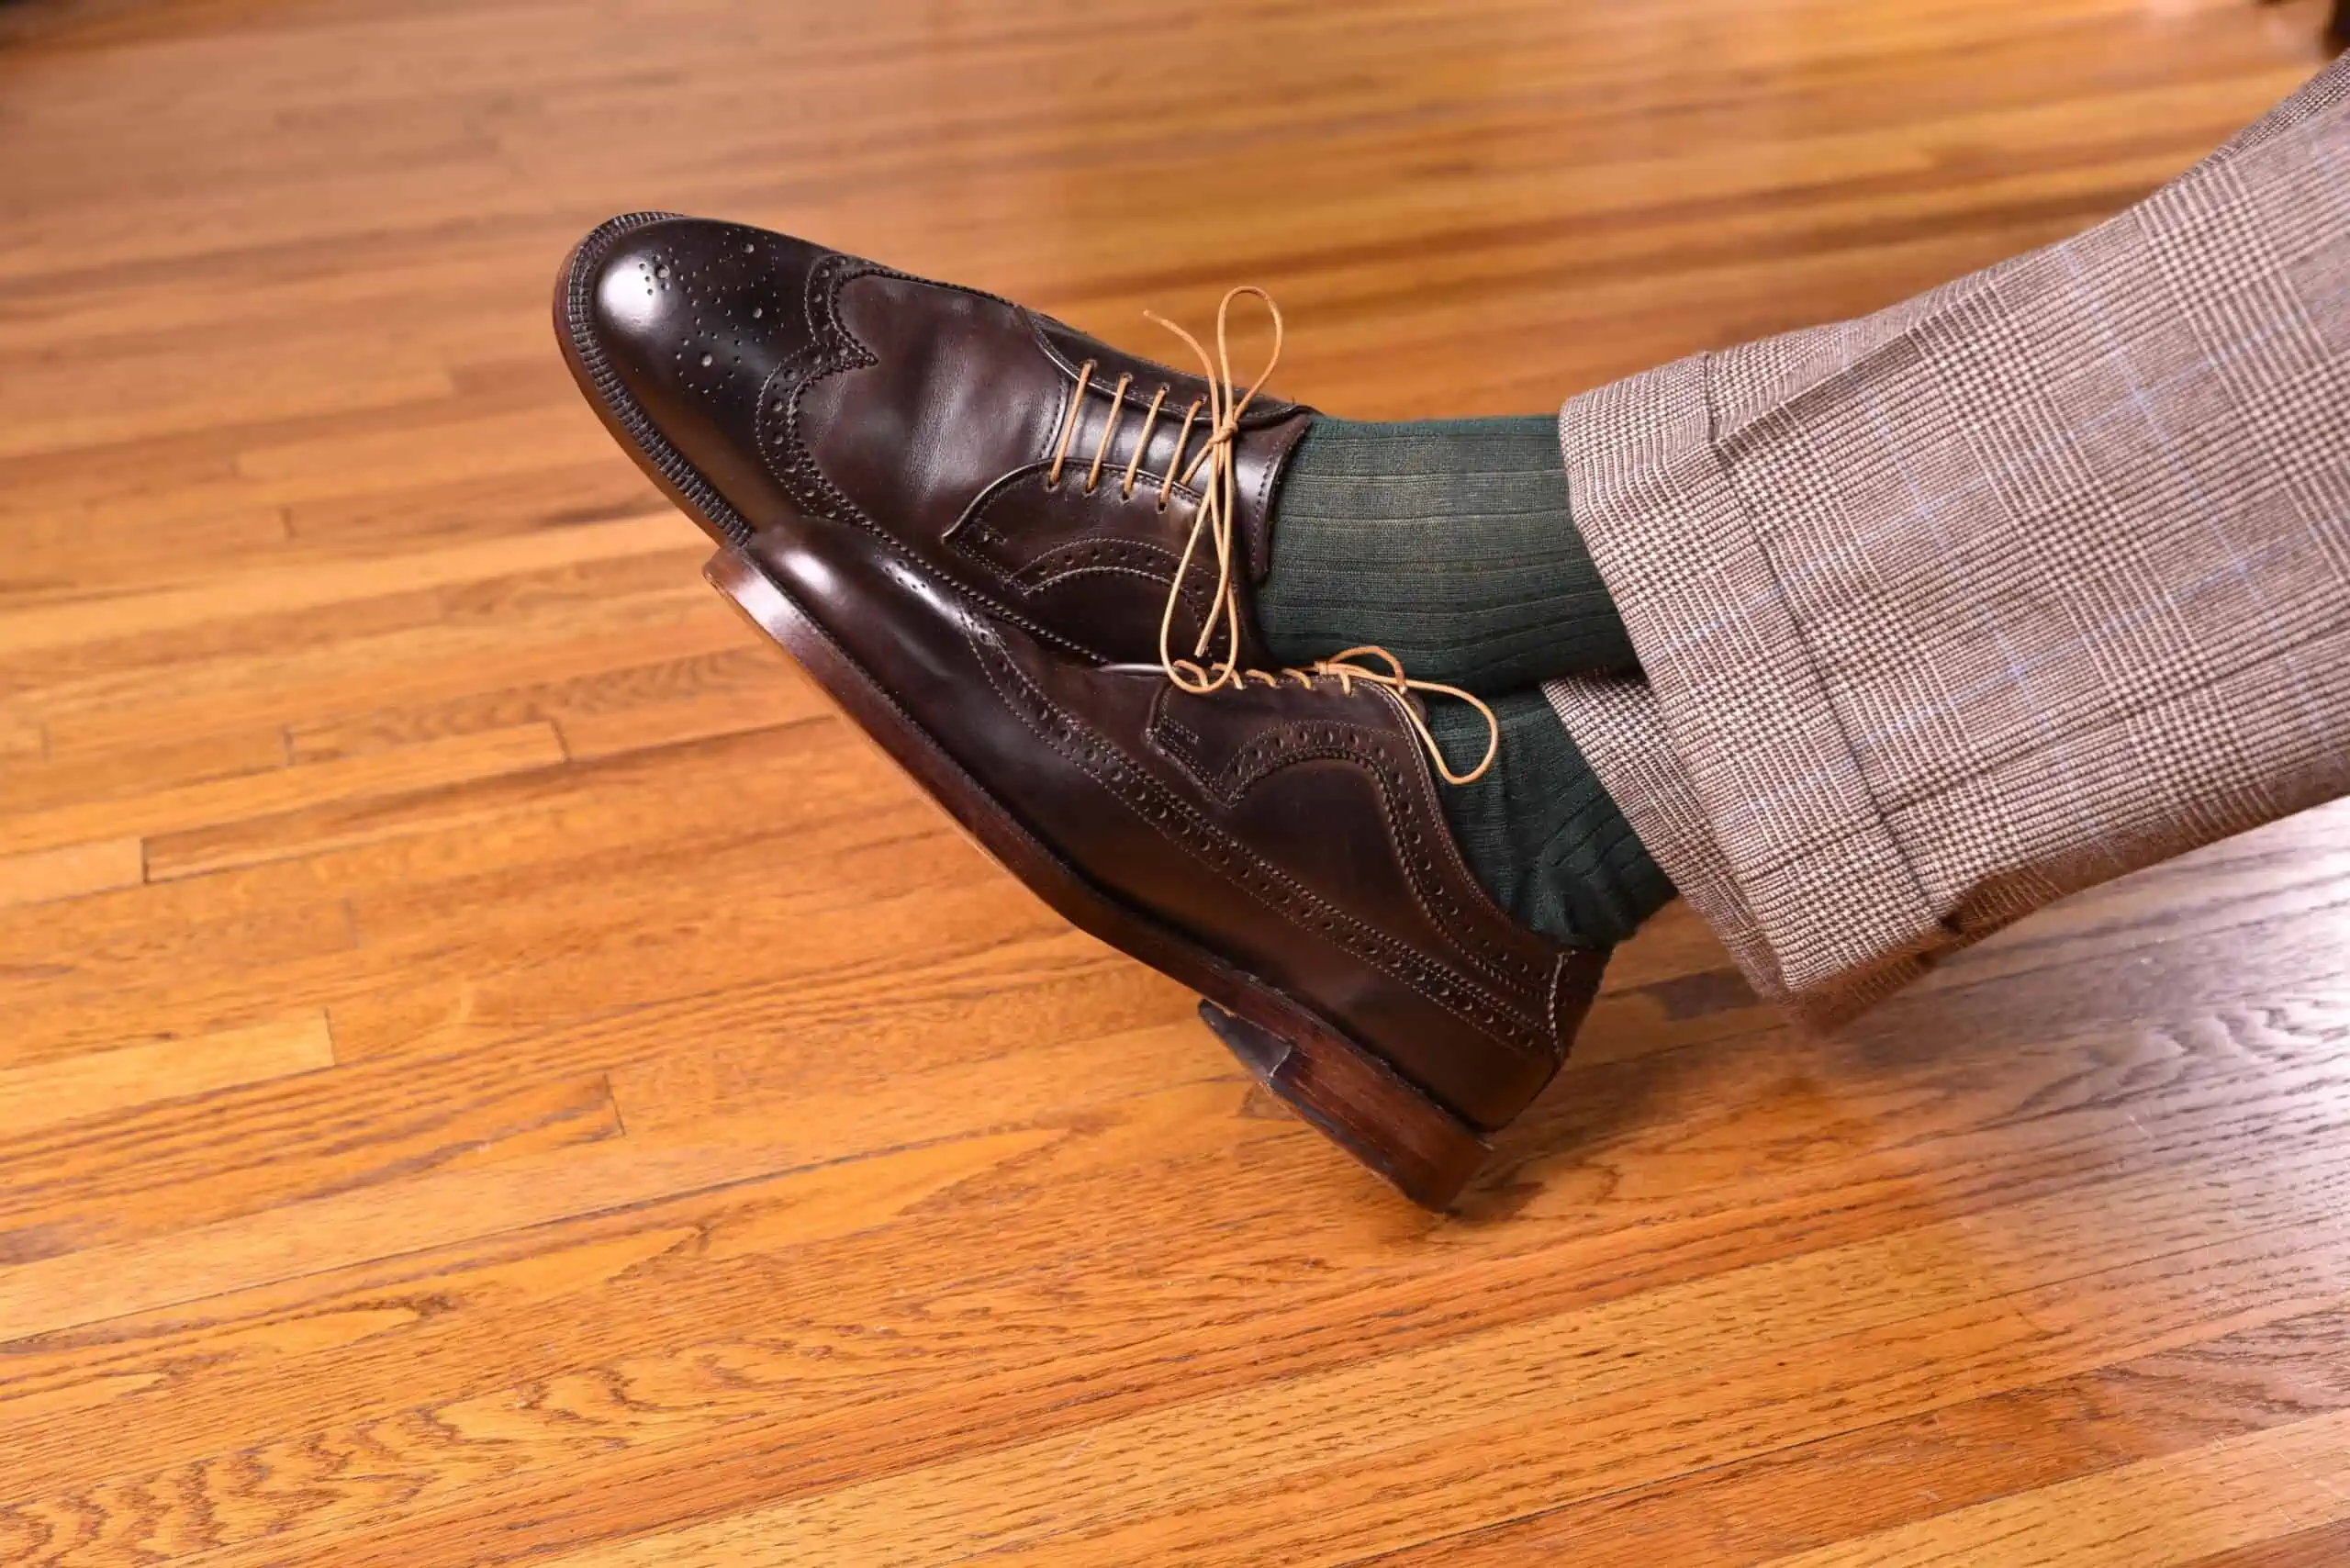 Dark brown cordovan shoes paired with green socks and checked trousers